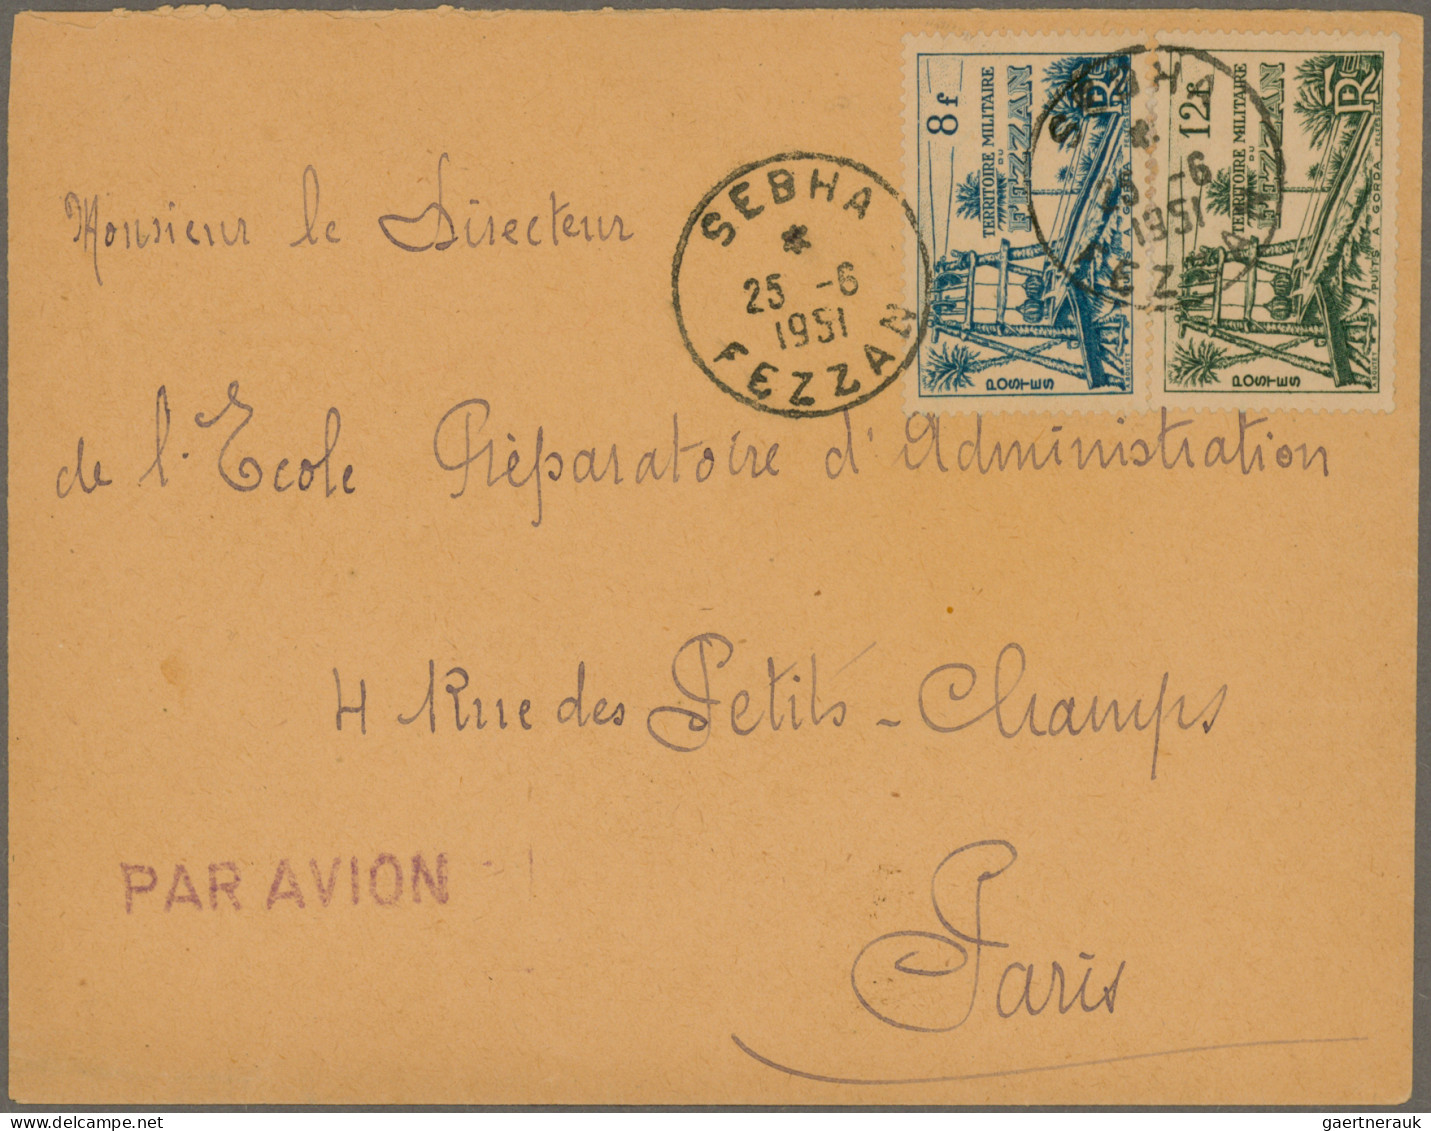 Fezzan: 1949, 8 Fr Blue And 12 Fr Green Tied By Cds "SEBHA 25 6 1961 FEZZAN" To - Lettres & Documents